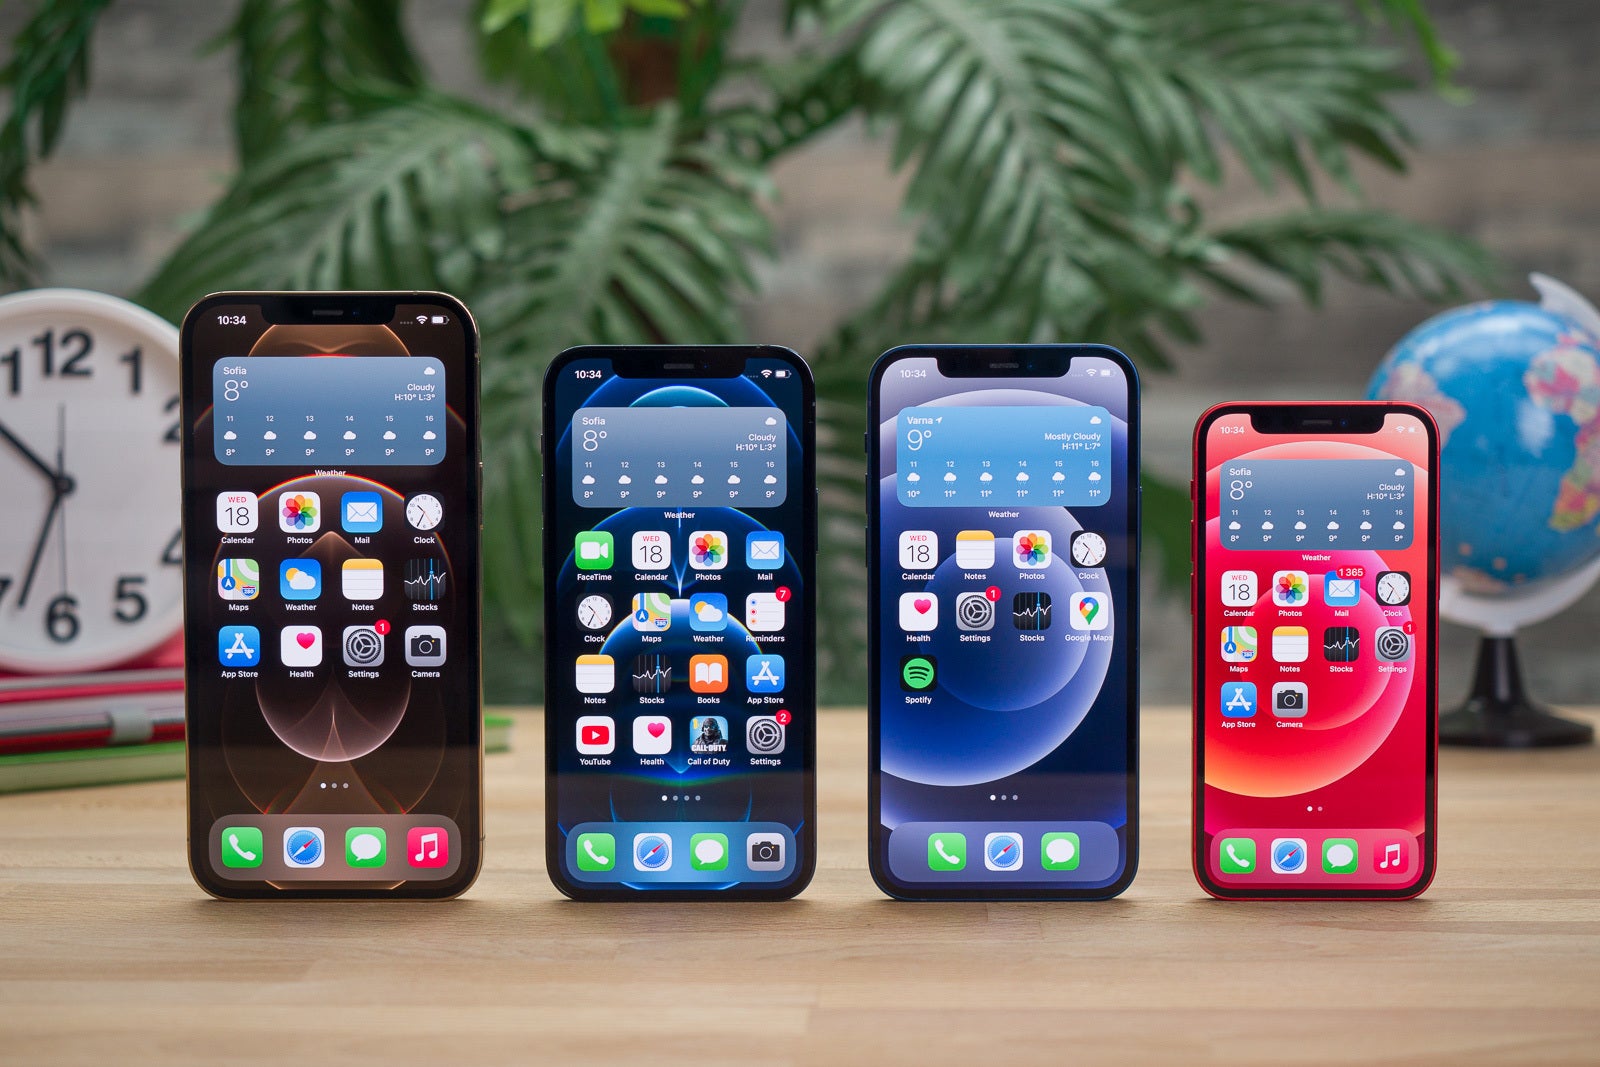 iPhone 12 Pro Max, iPhone 12 Pro, iPhone 12, iPhone 12 mini - iPhone 12 review